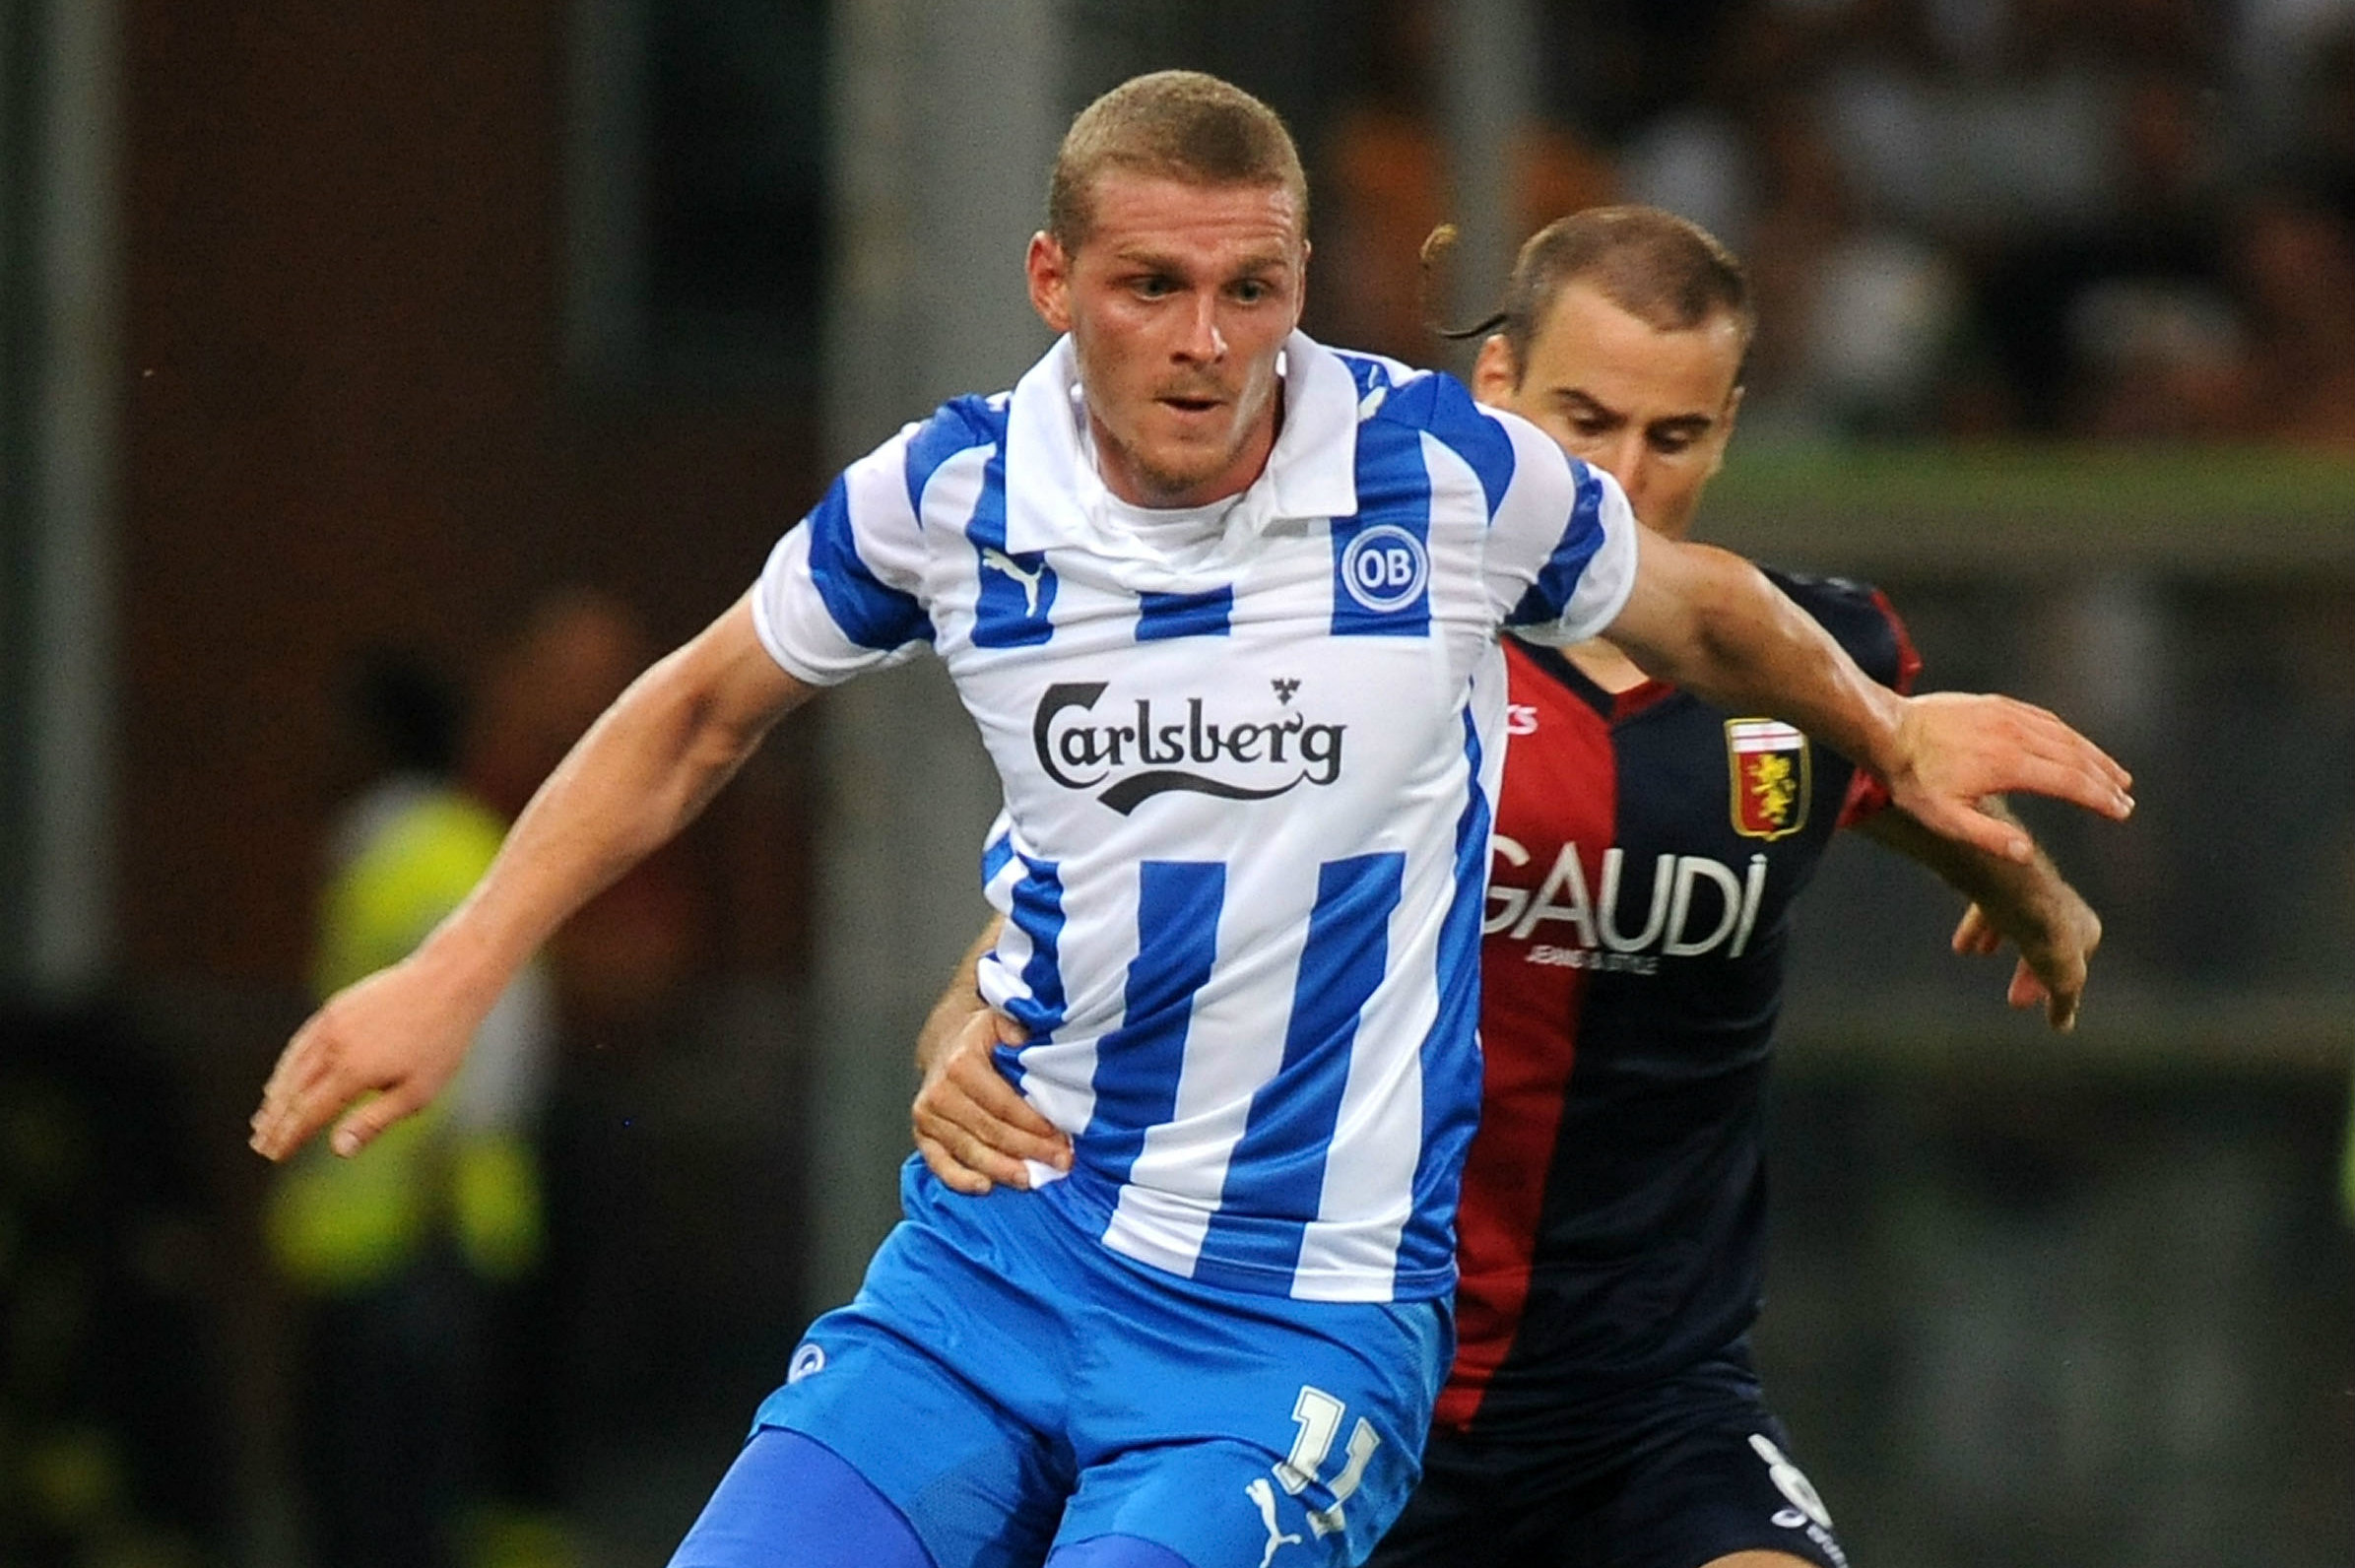 Johan Absalonsen during his playing days with Odense in Denmark.